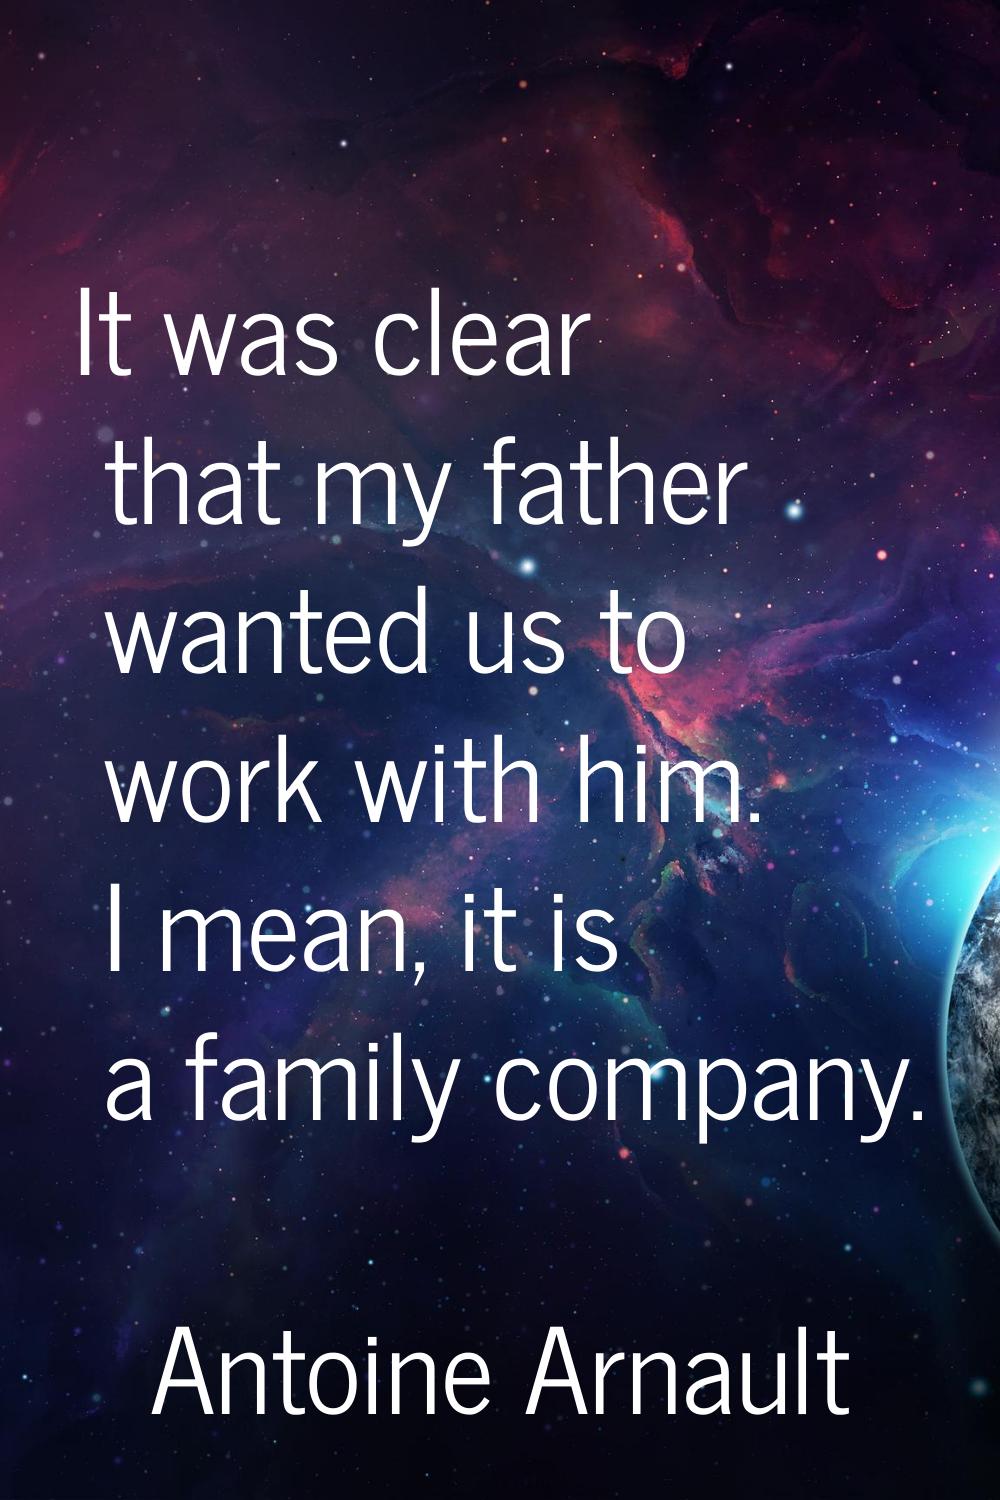 It was clear that my father wanted us to work with him. I mean, it is a family company.